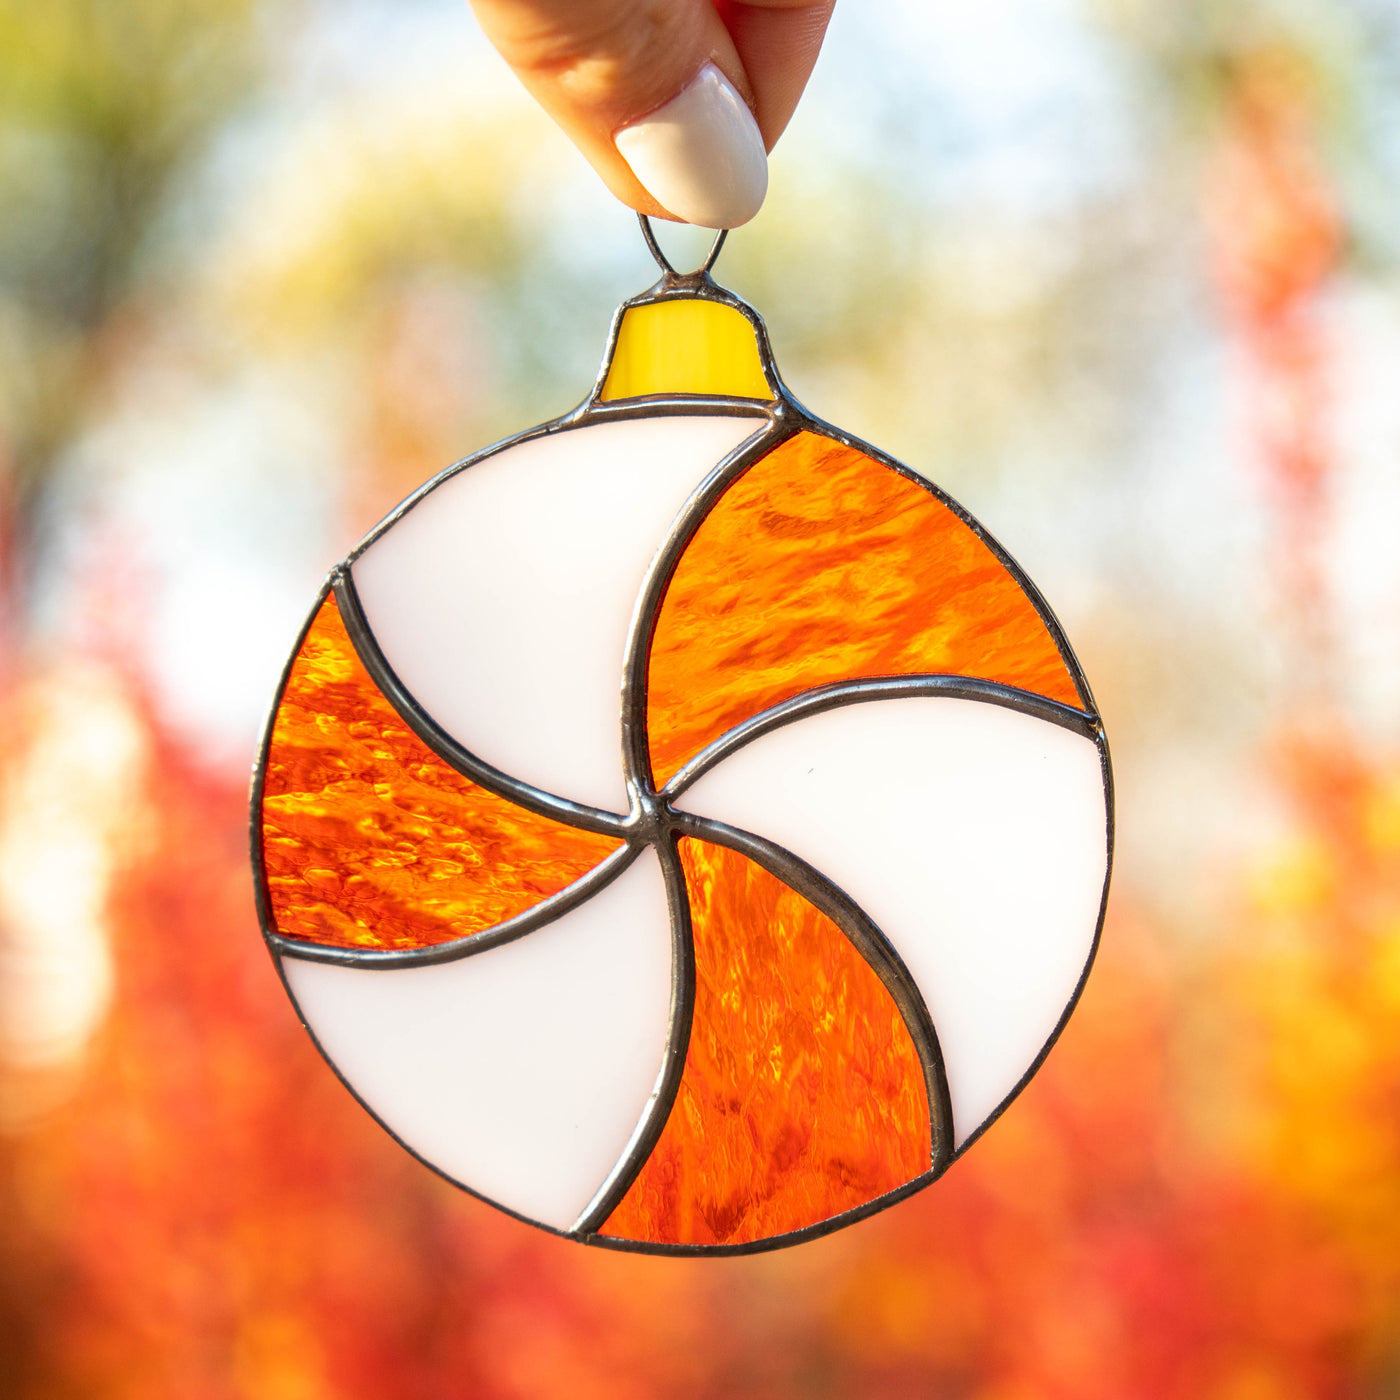 Stained glass round white and orange candy suncatcher 